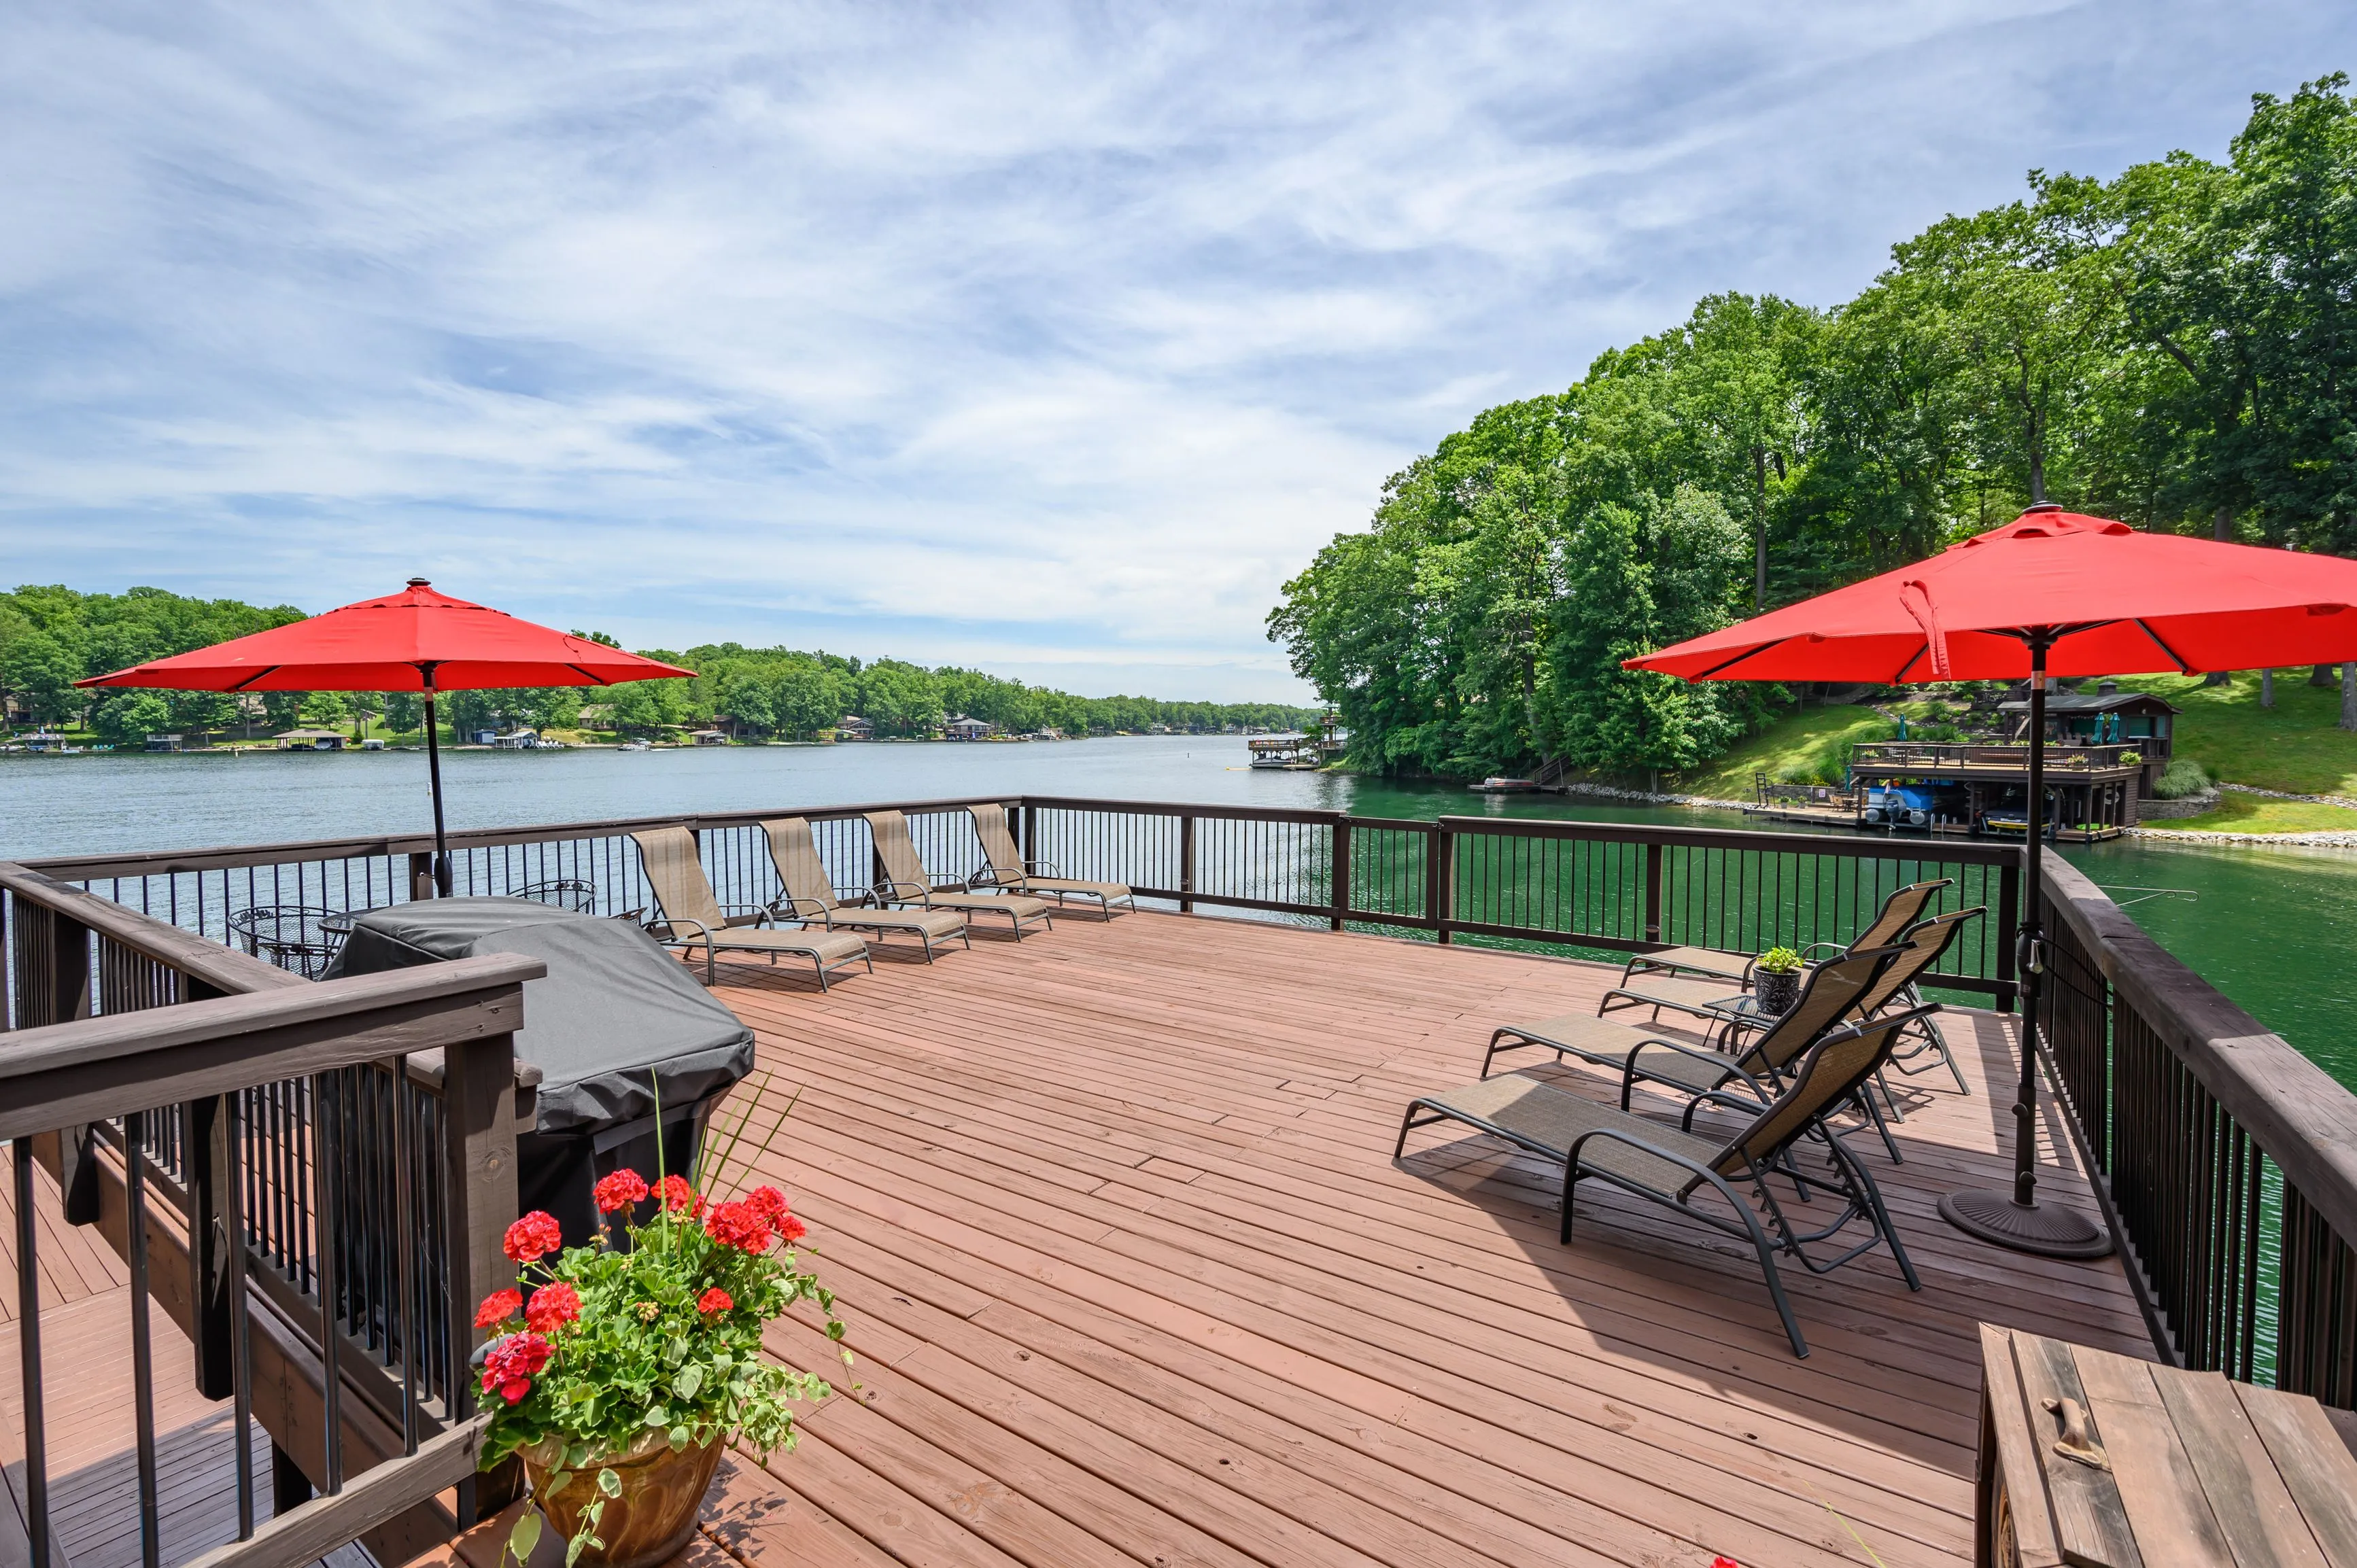 Wooden deck overlooking a tranquil lake with two red patio umbrellas, lounge chairs, and a flowerpot with red flowers.